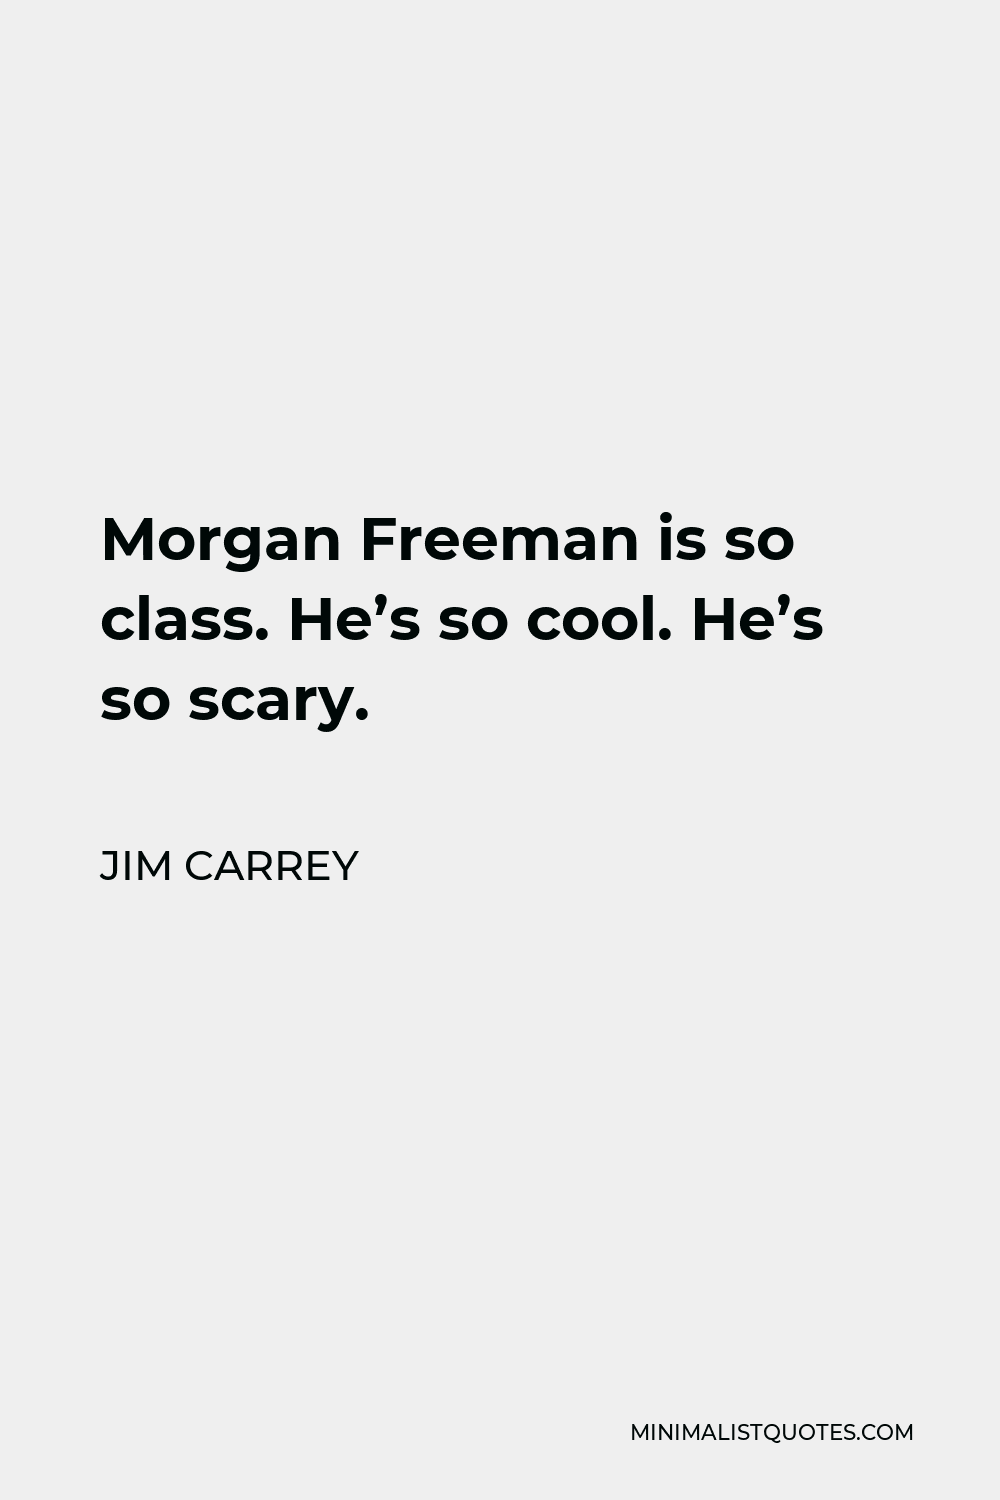 Jim Carrey Quote - Morgan Freeman is so class. He’s so cool. He’s so scary.